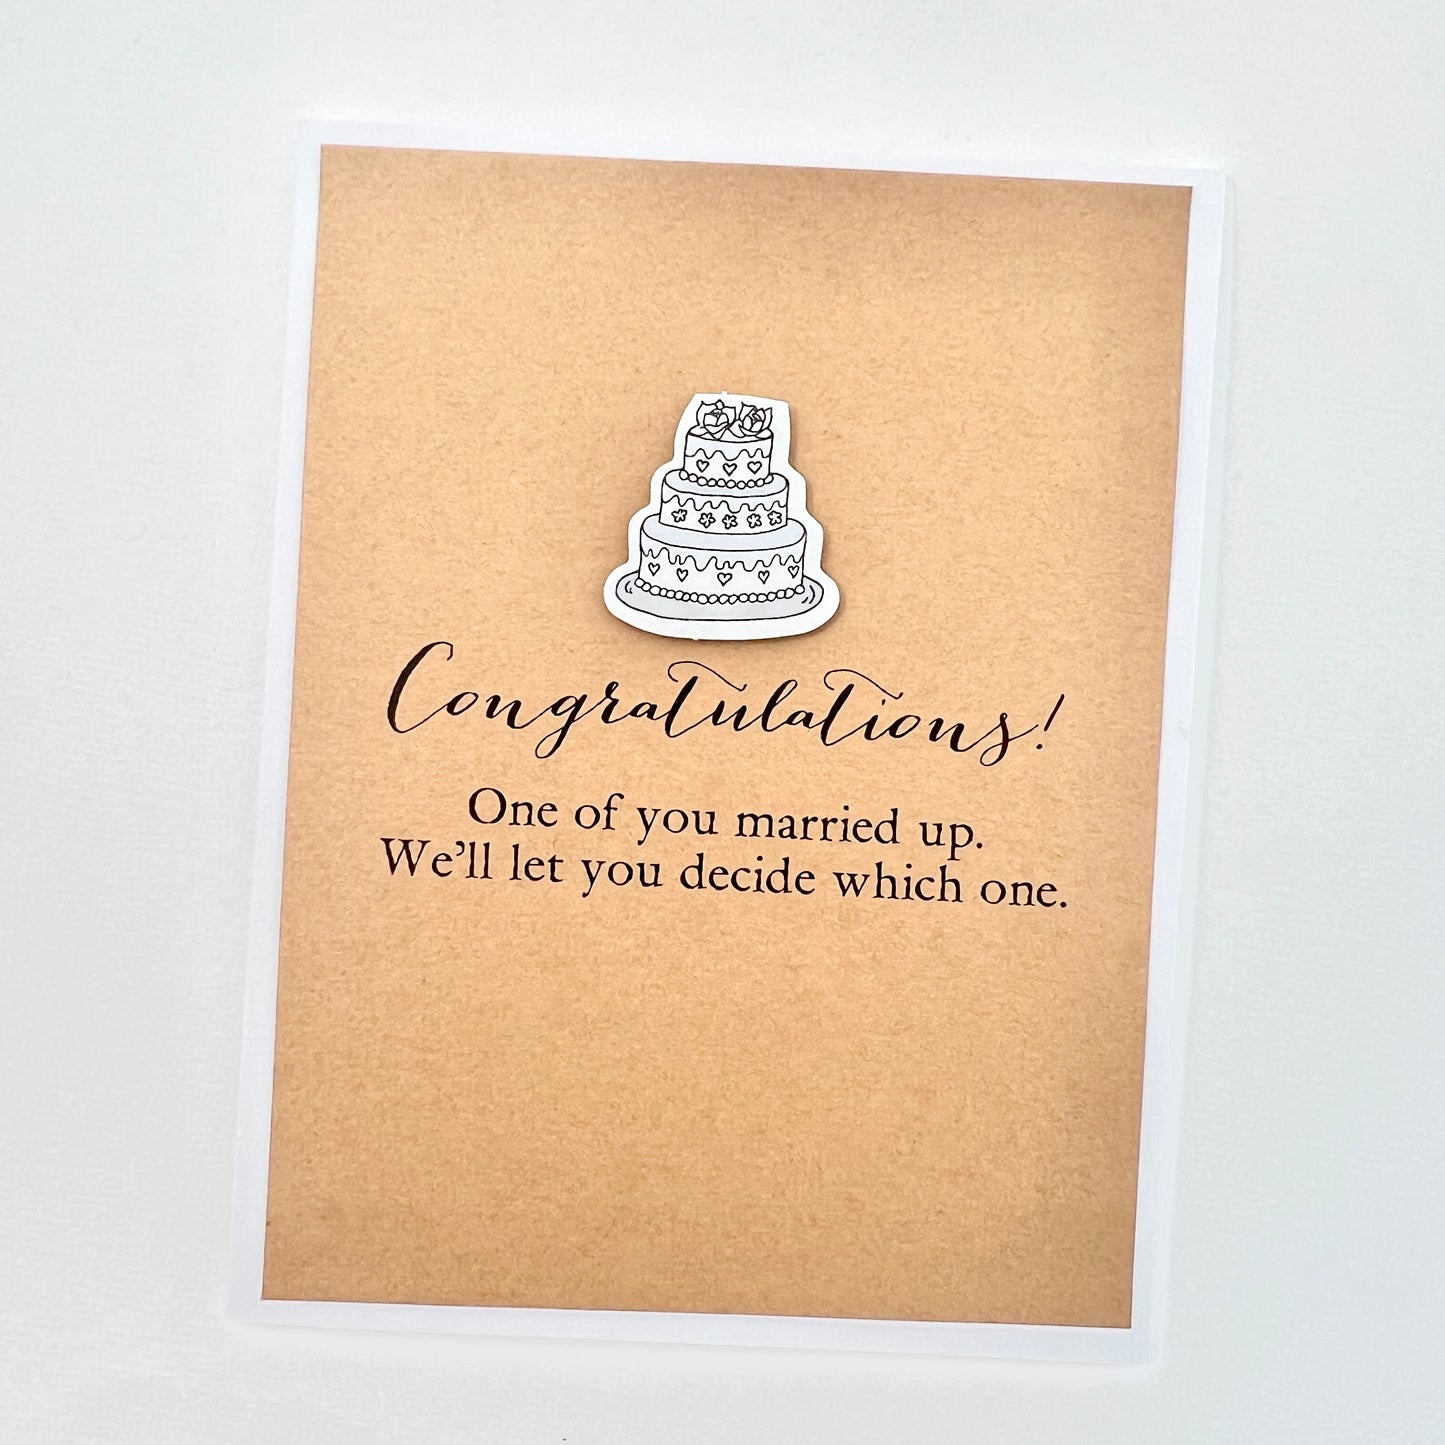 One of You Married Up card